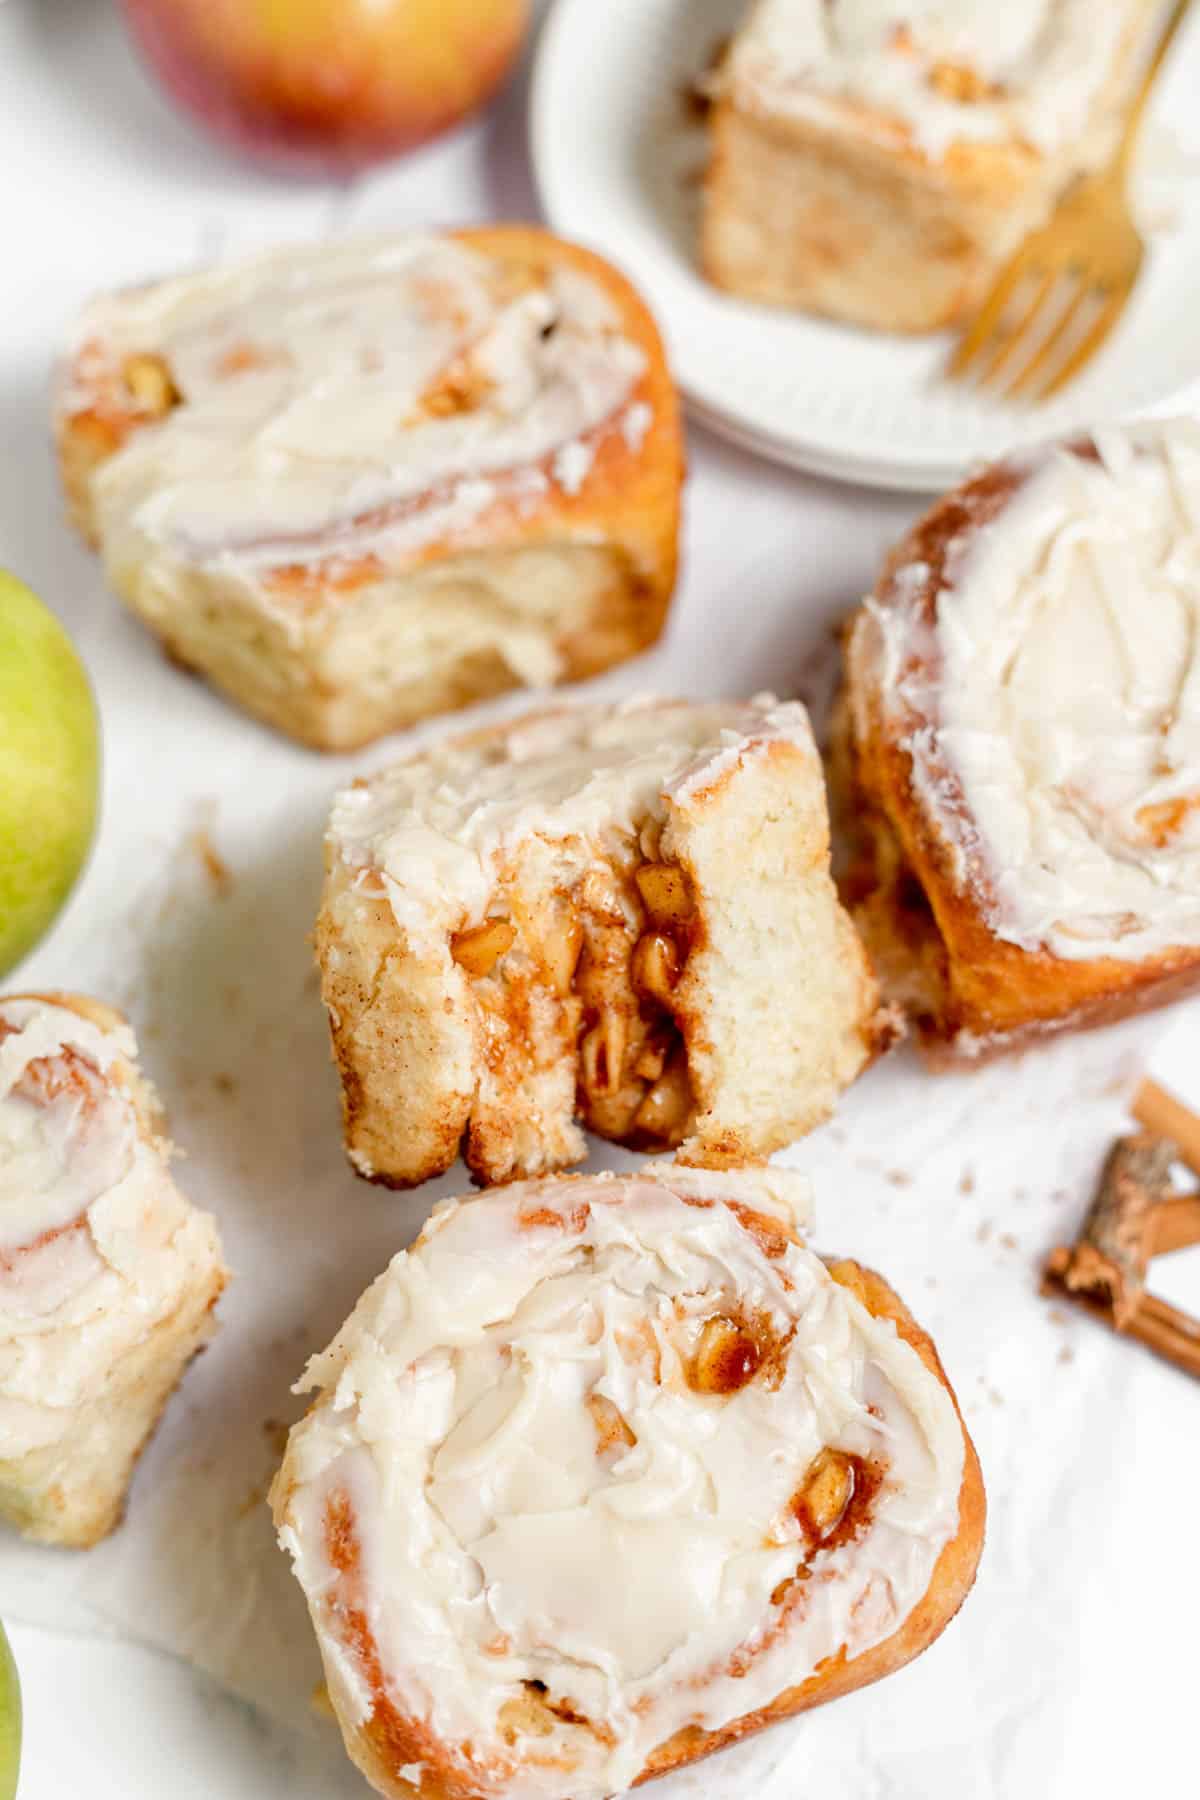 Homemade Apple Cinnamon Rolls from Scratch - House of Nash Eats